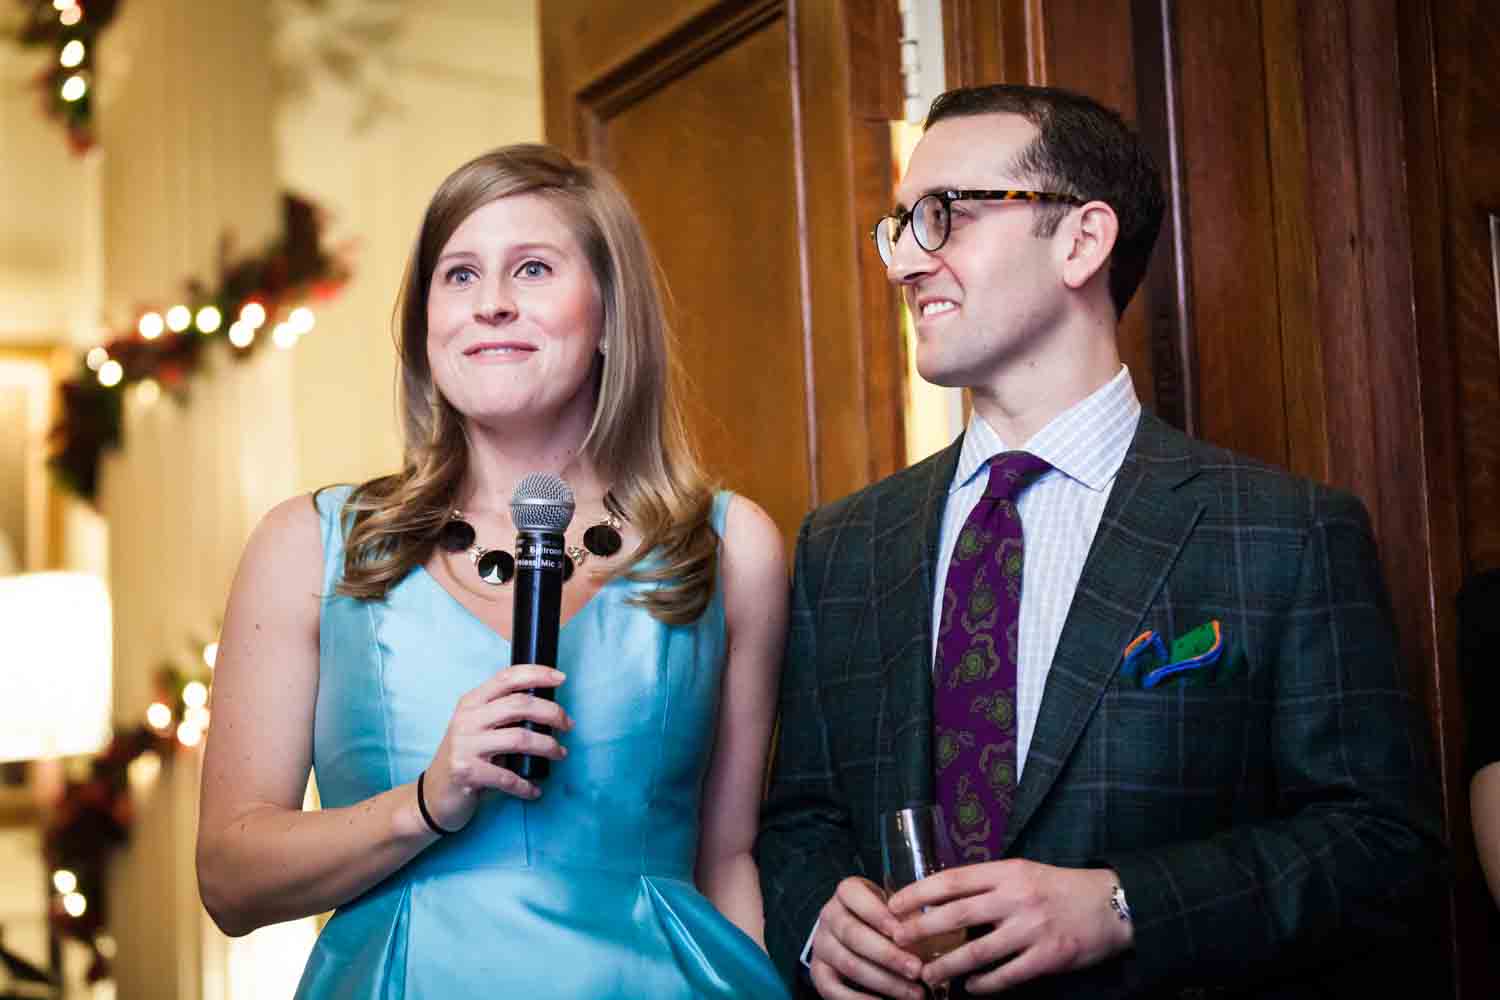 Woman in blue dress holding microphone next to man at a Lotos Club engagement party